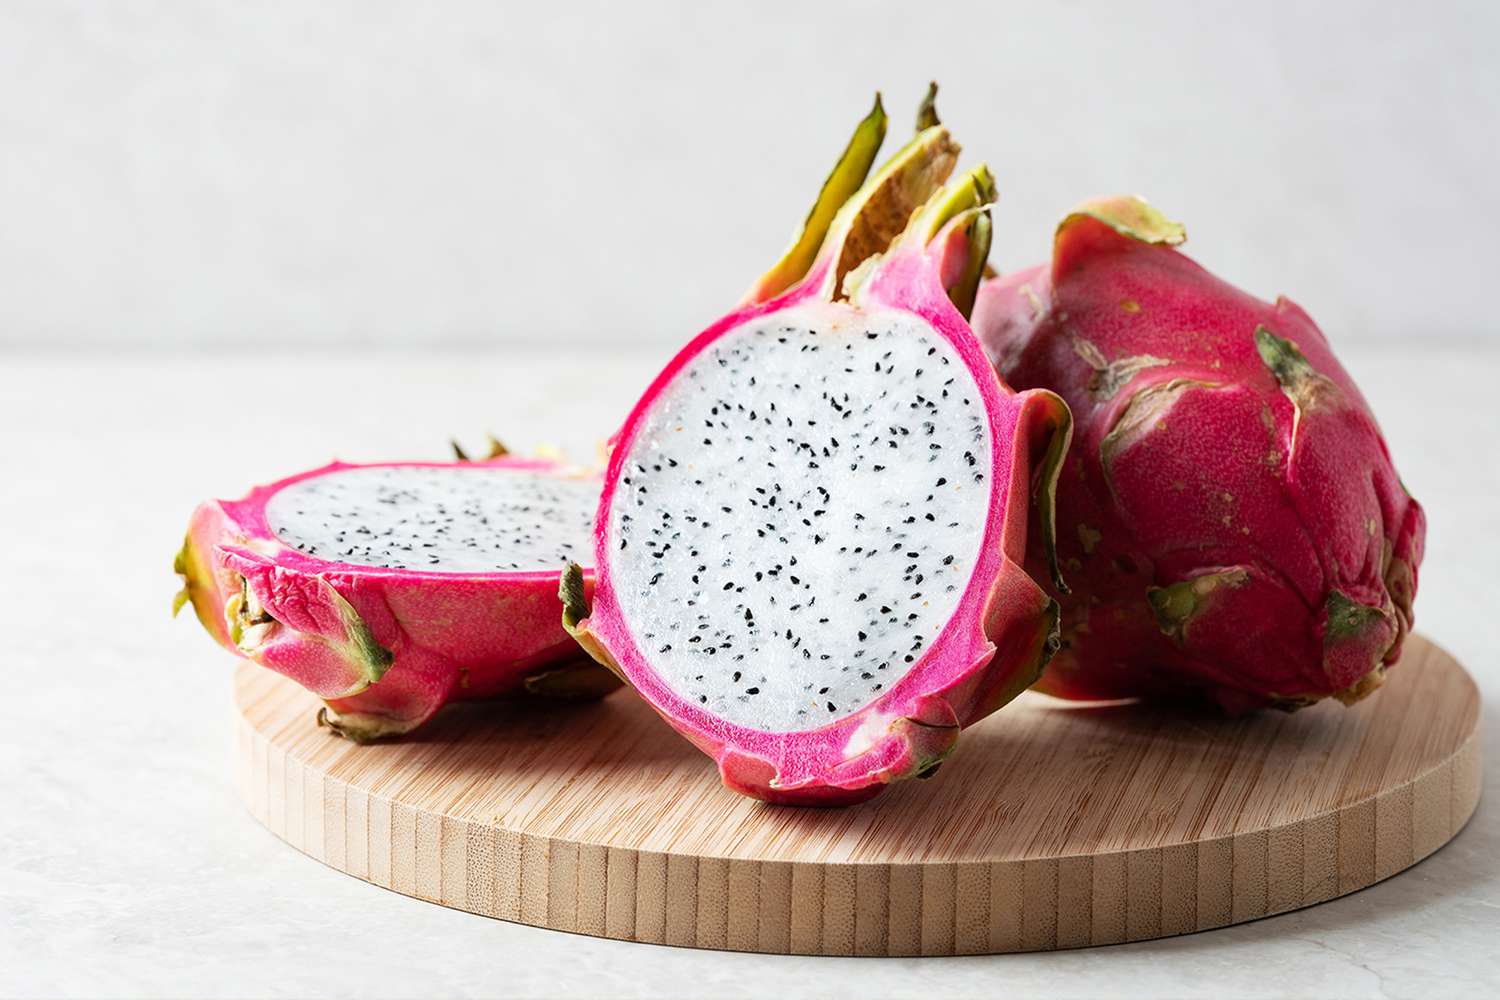 How to Eat Dragon Fruit the Right Way, According to a Tropical Fruit Expert